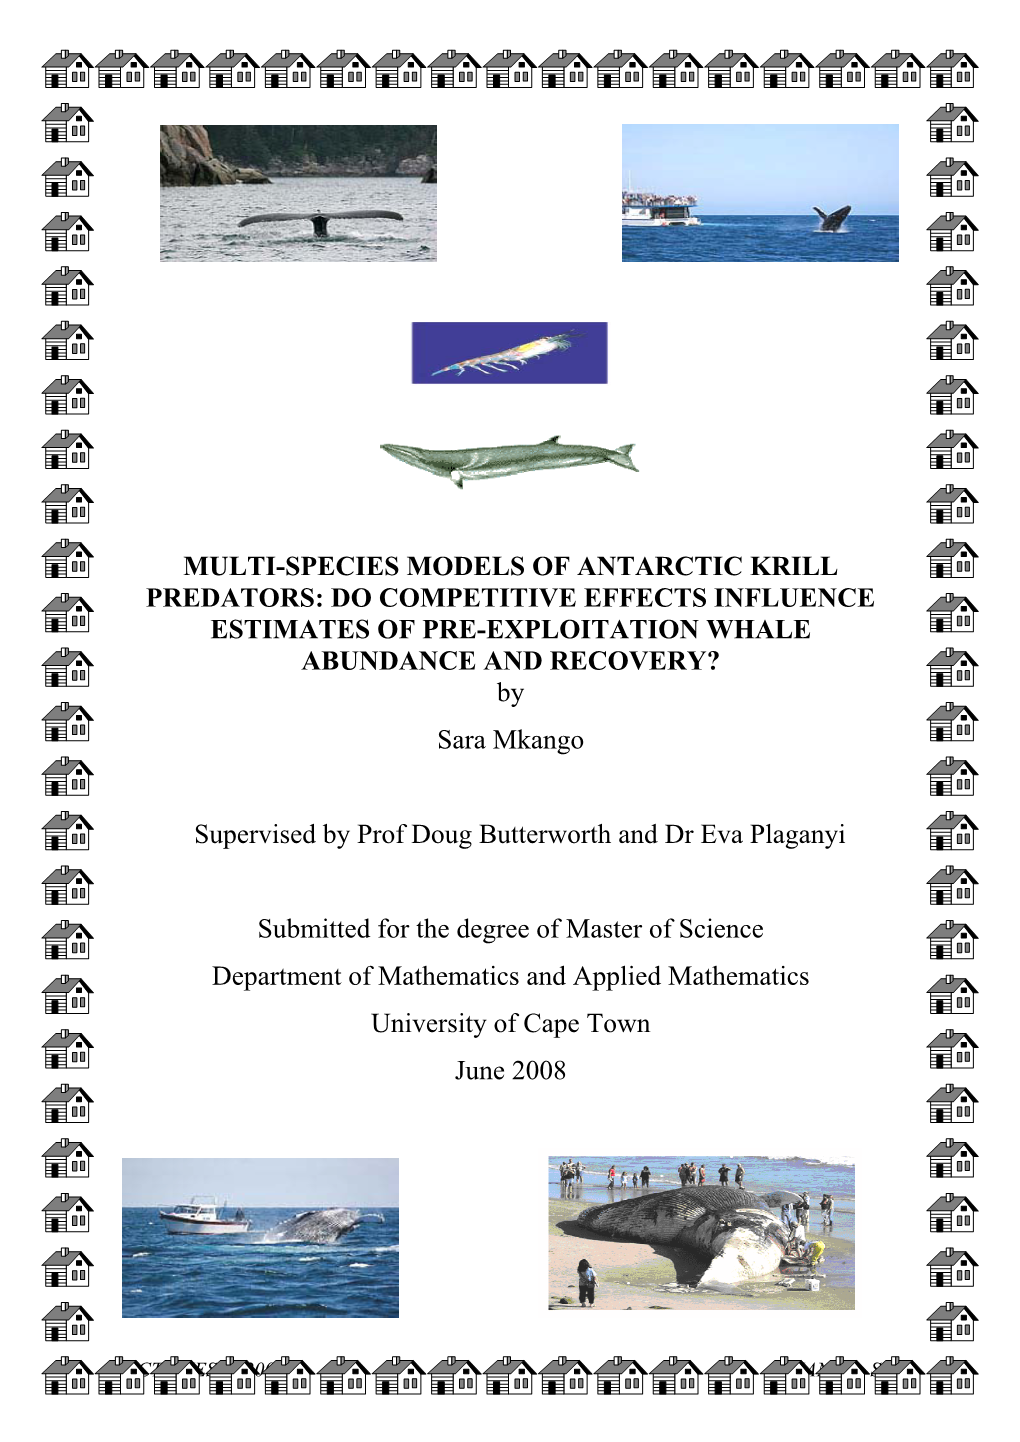 MULTI-SPECIES MODELS of ANTARCTIC KRILL PREDATORS: DO COMPETITIVE EFFECTS INFLUENCE ESTIMATES of PRE-EXPLOITATION WHALE ABUNDANCE and RECOVERY? by Sara Mkango